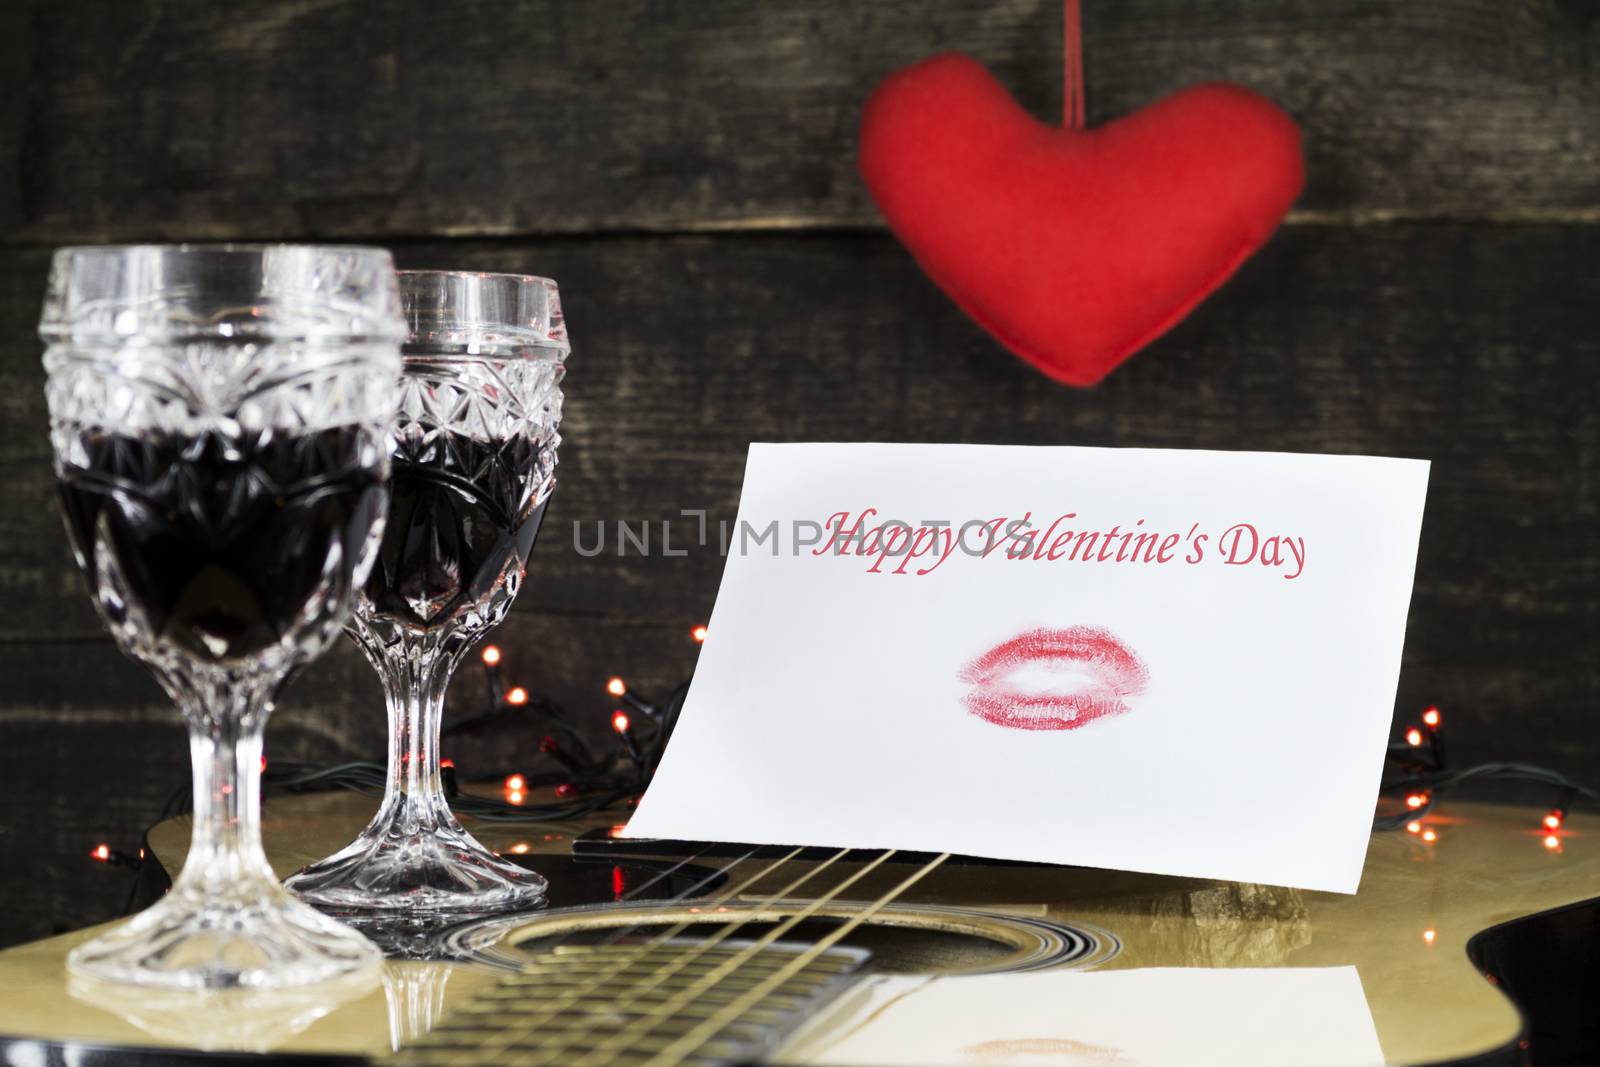 Happy Valentine's Day Kiss On White Paper Resting on Acoustic Guitar With Vine Glasses, Lights and Heart